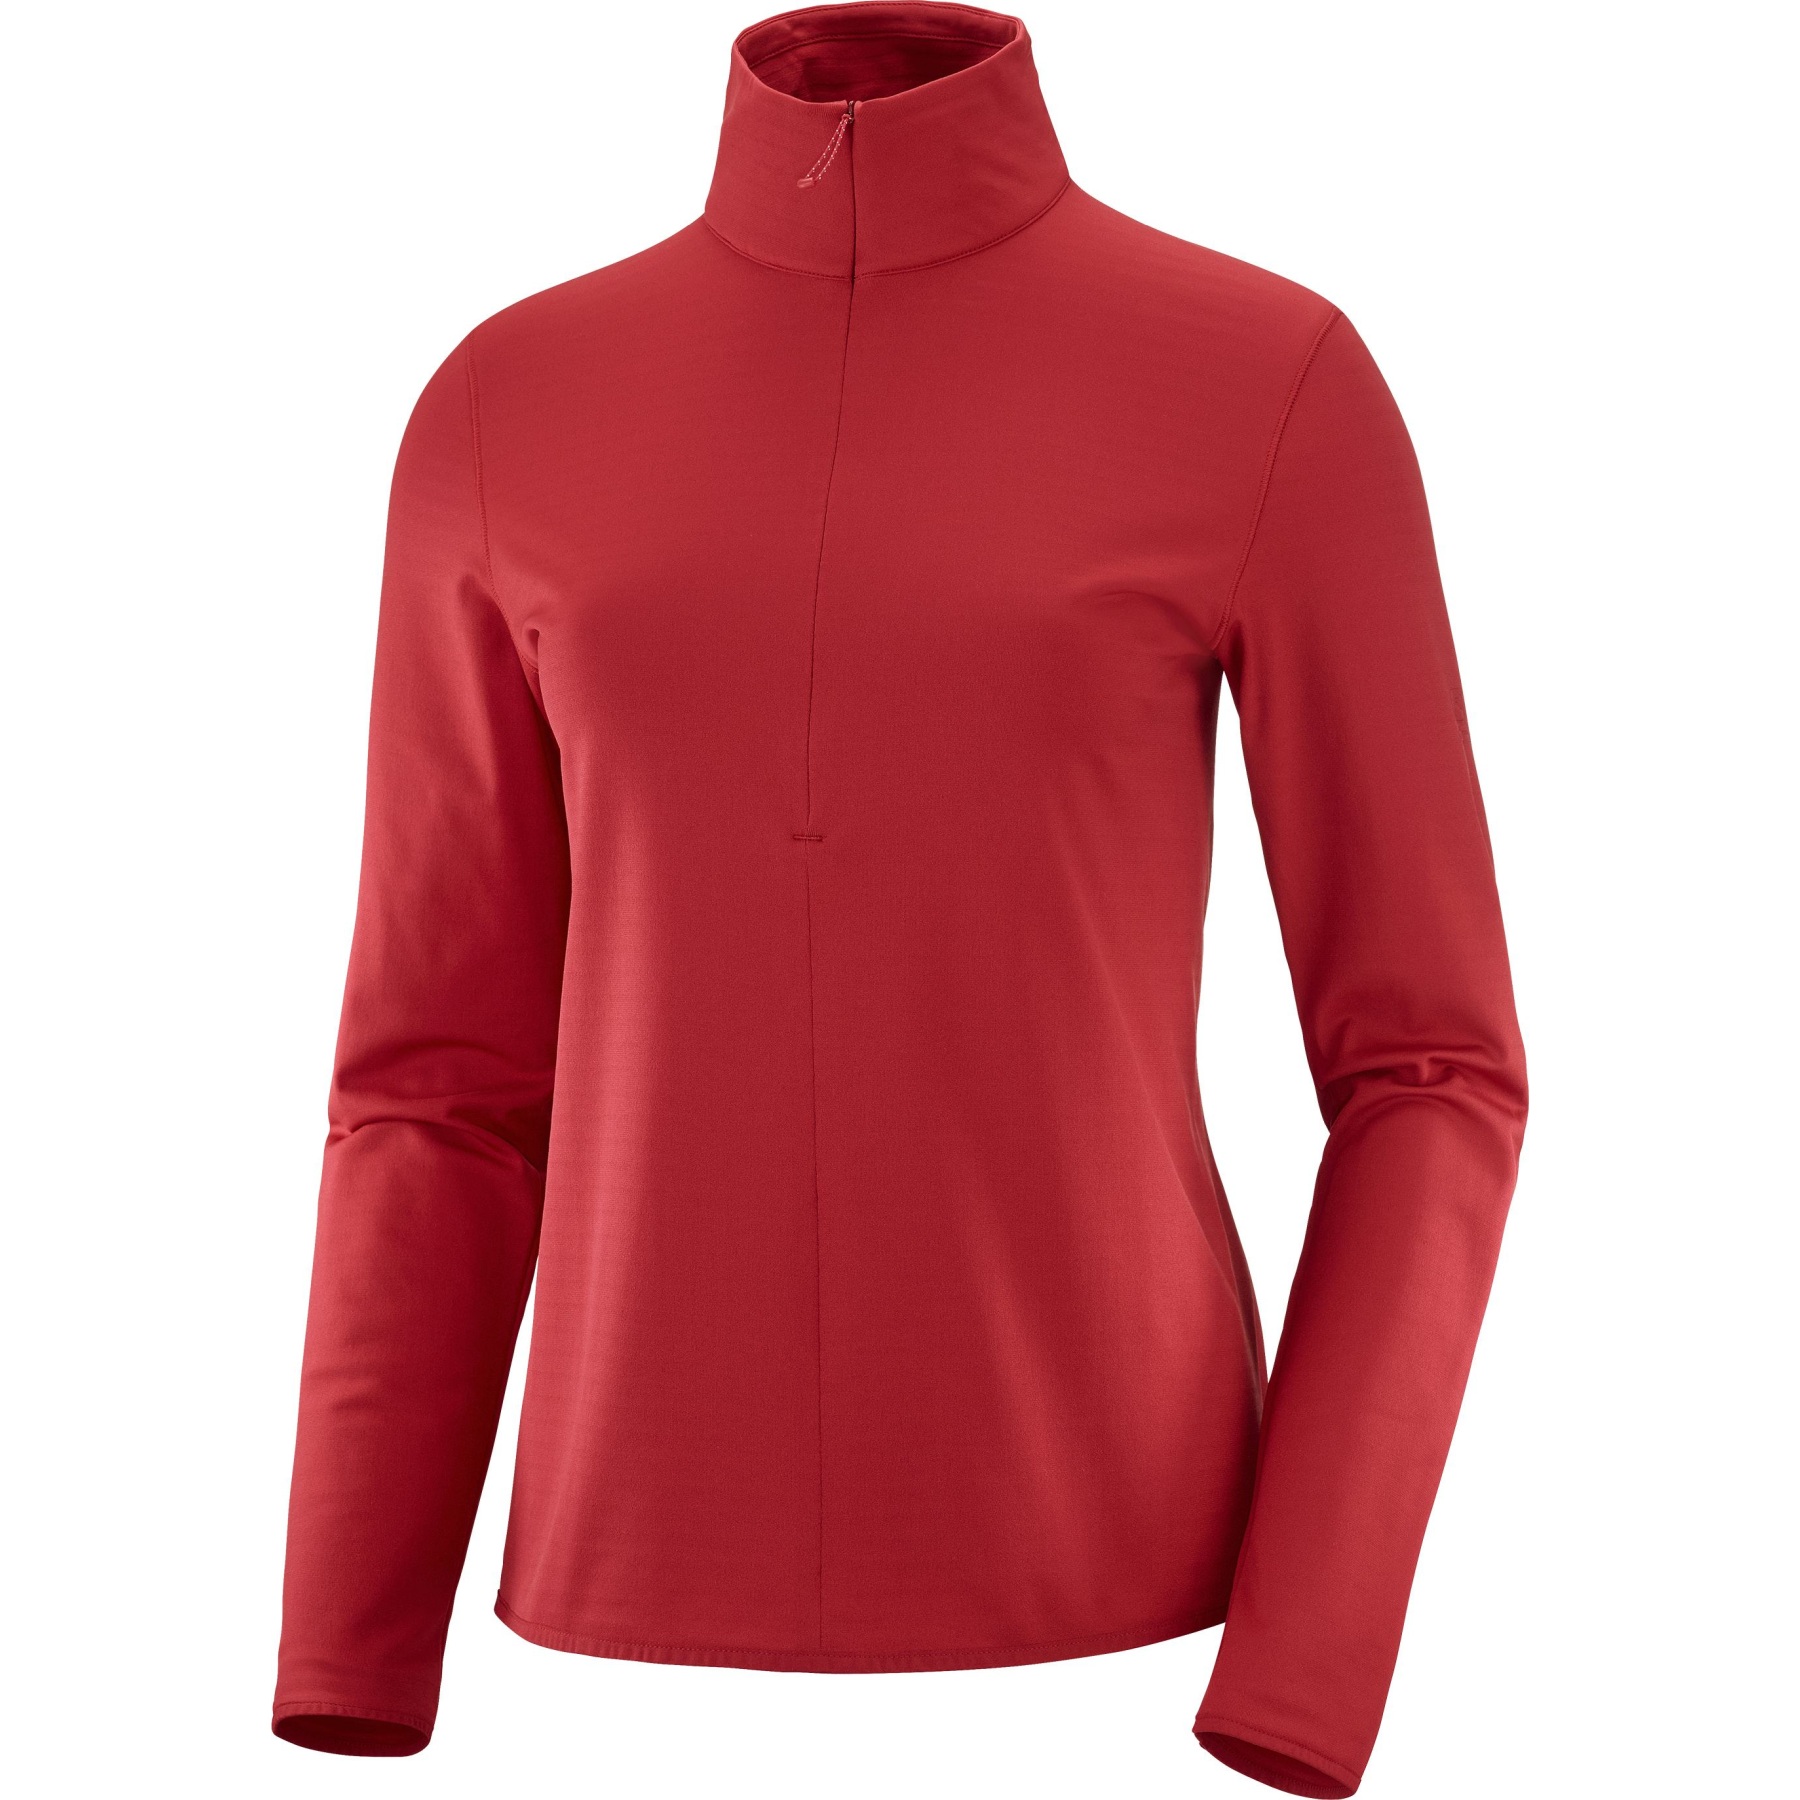 Picture of Salomon Outrack Half-Zip Midlayer Longsleeve Shirt Women - red chili